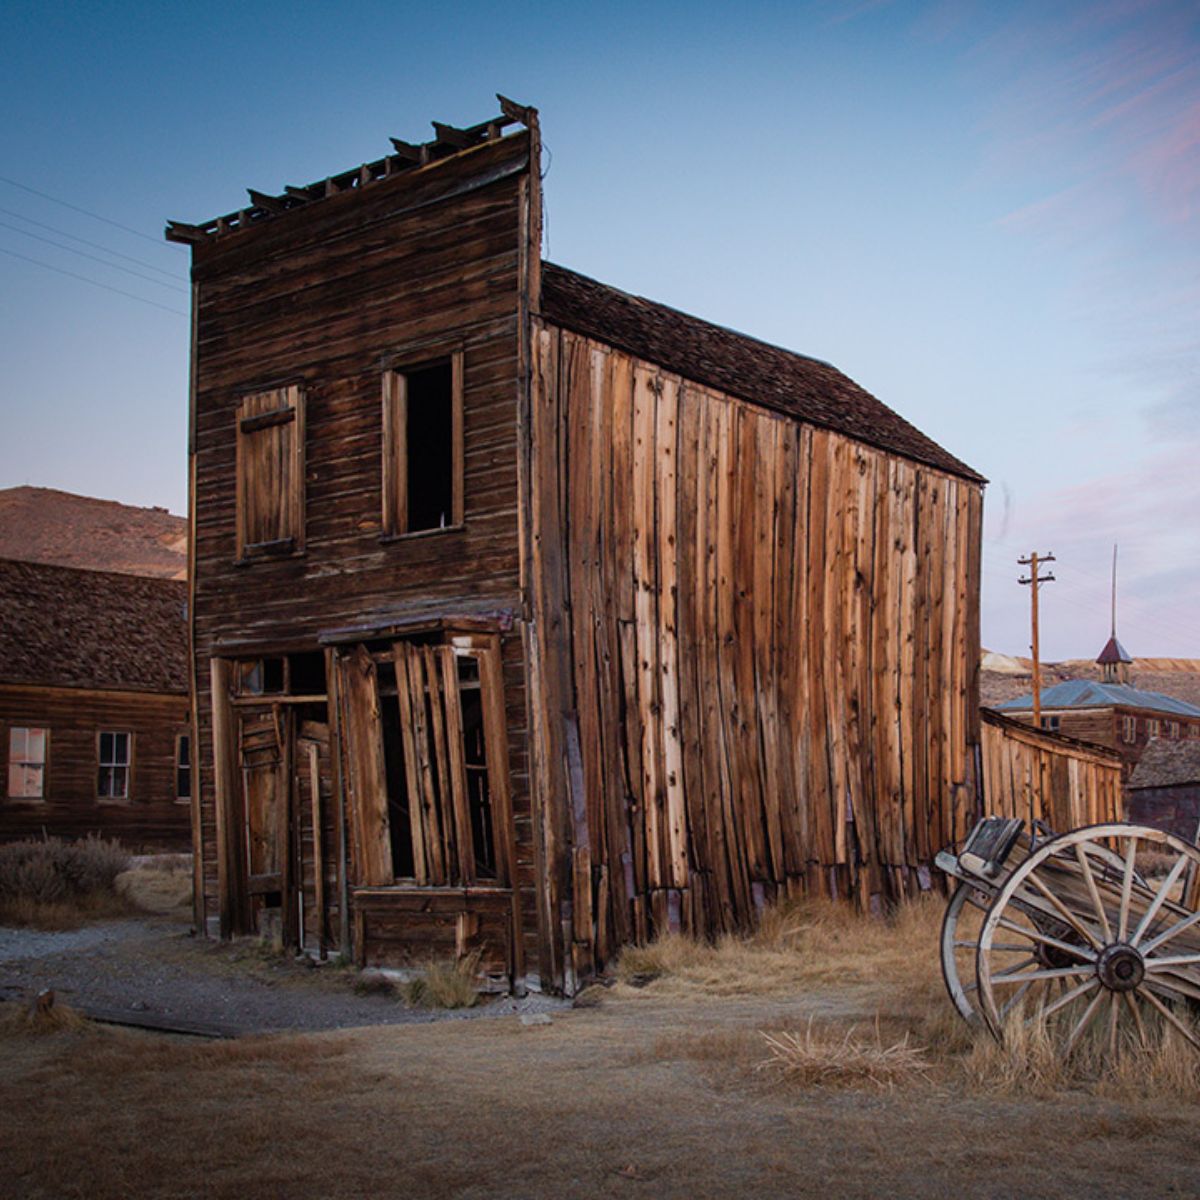 California Ghost Towns